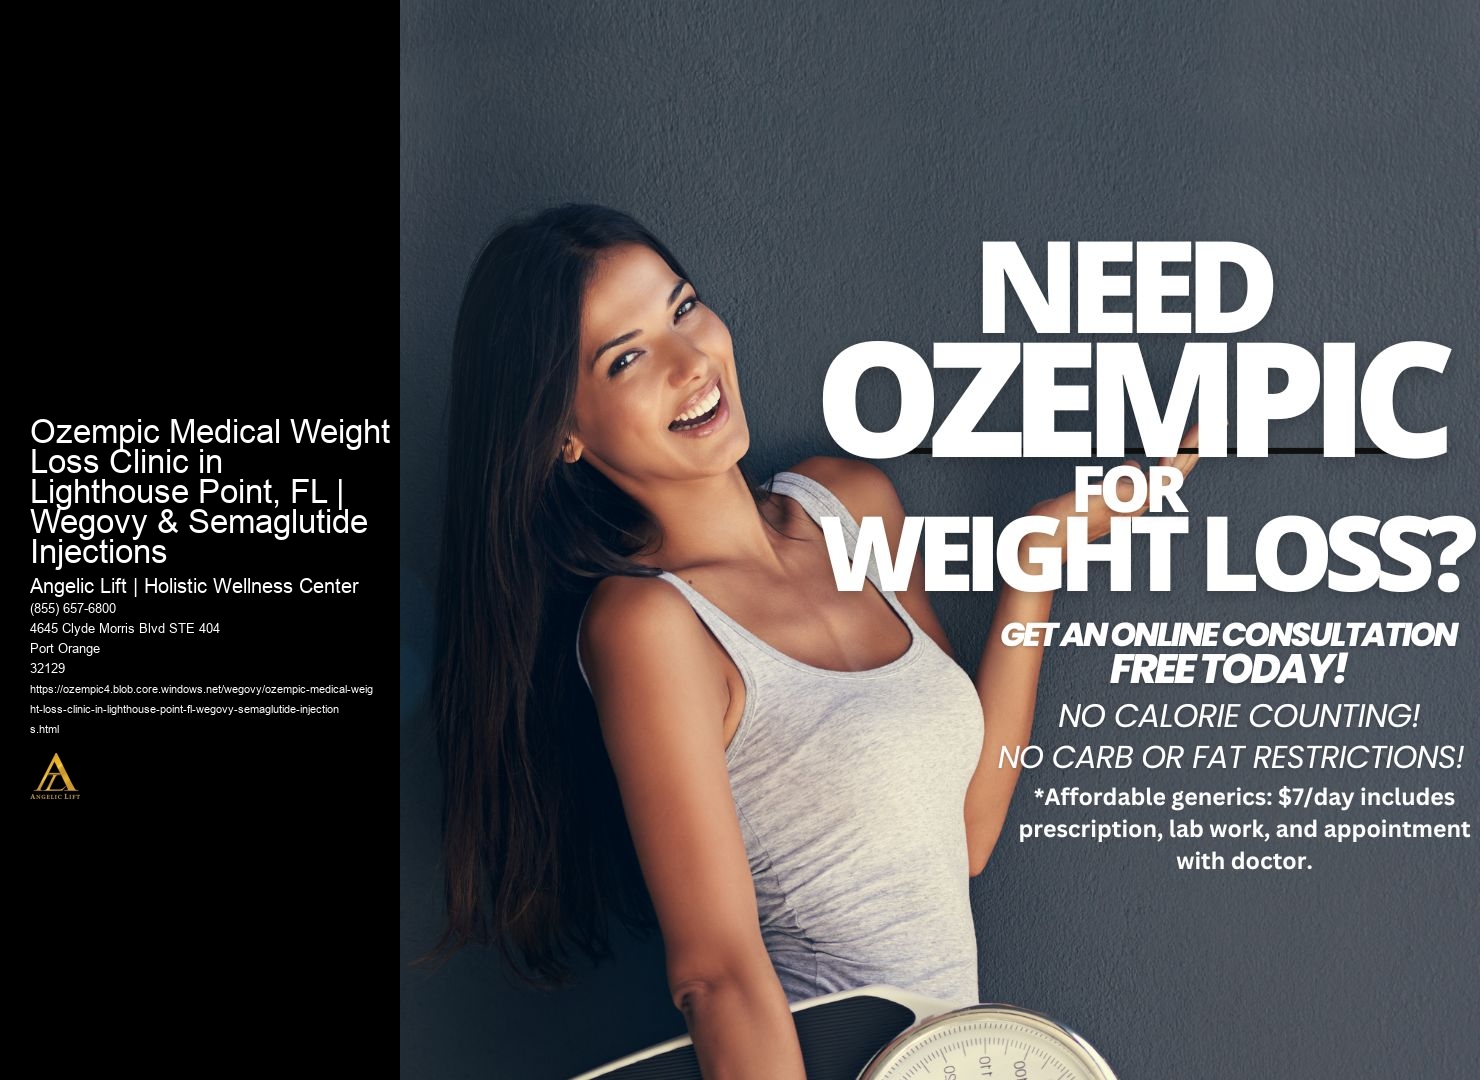 Ozempic Medical Weight Loss Clinic in Lighthouse Point, FL | Wegovy & Semaglutide Injections